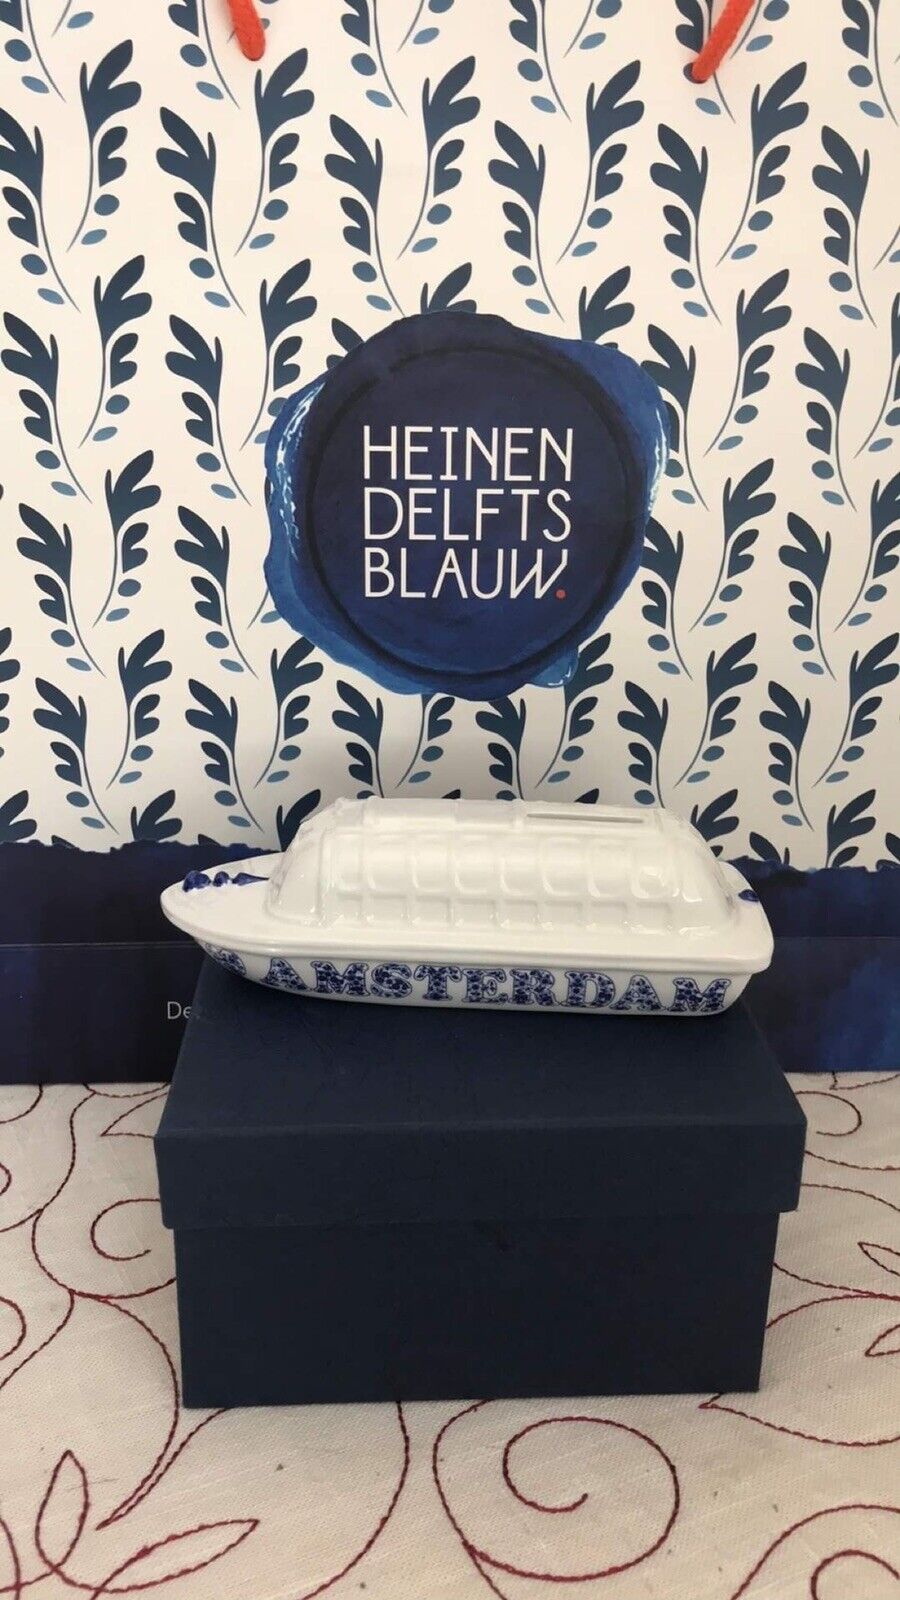 NEW Heinen Delfts Blauw Blue/White I LOVE AMSTERDAM Canal Boat House Coin Bank